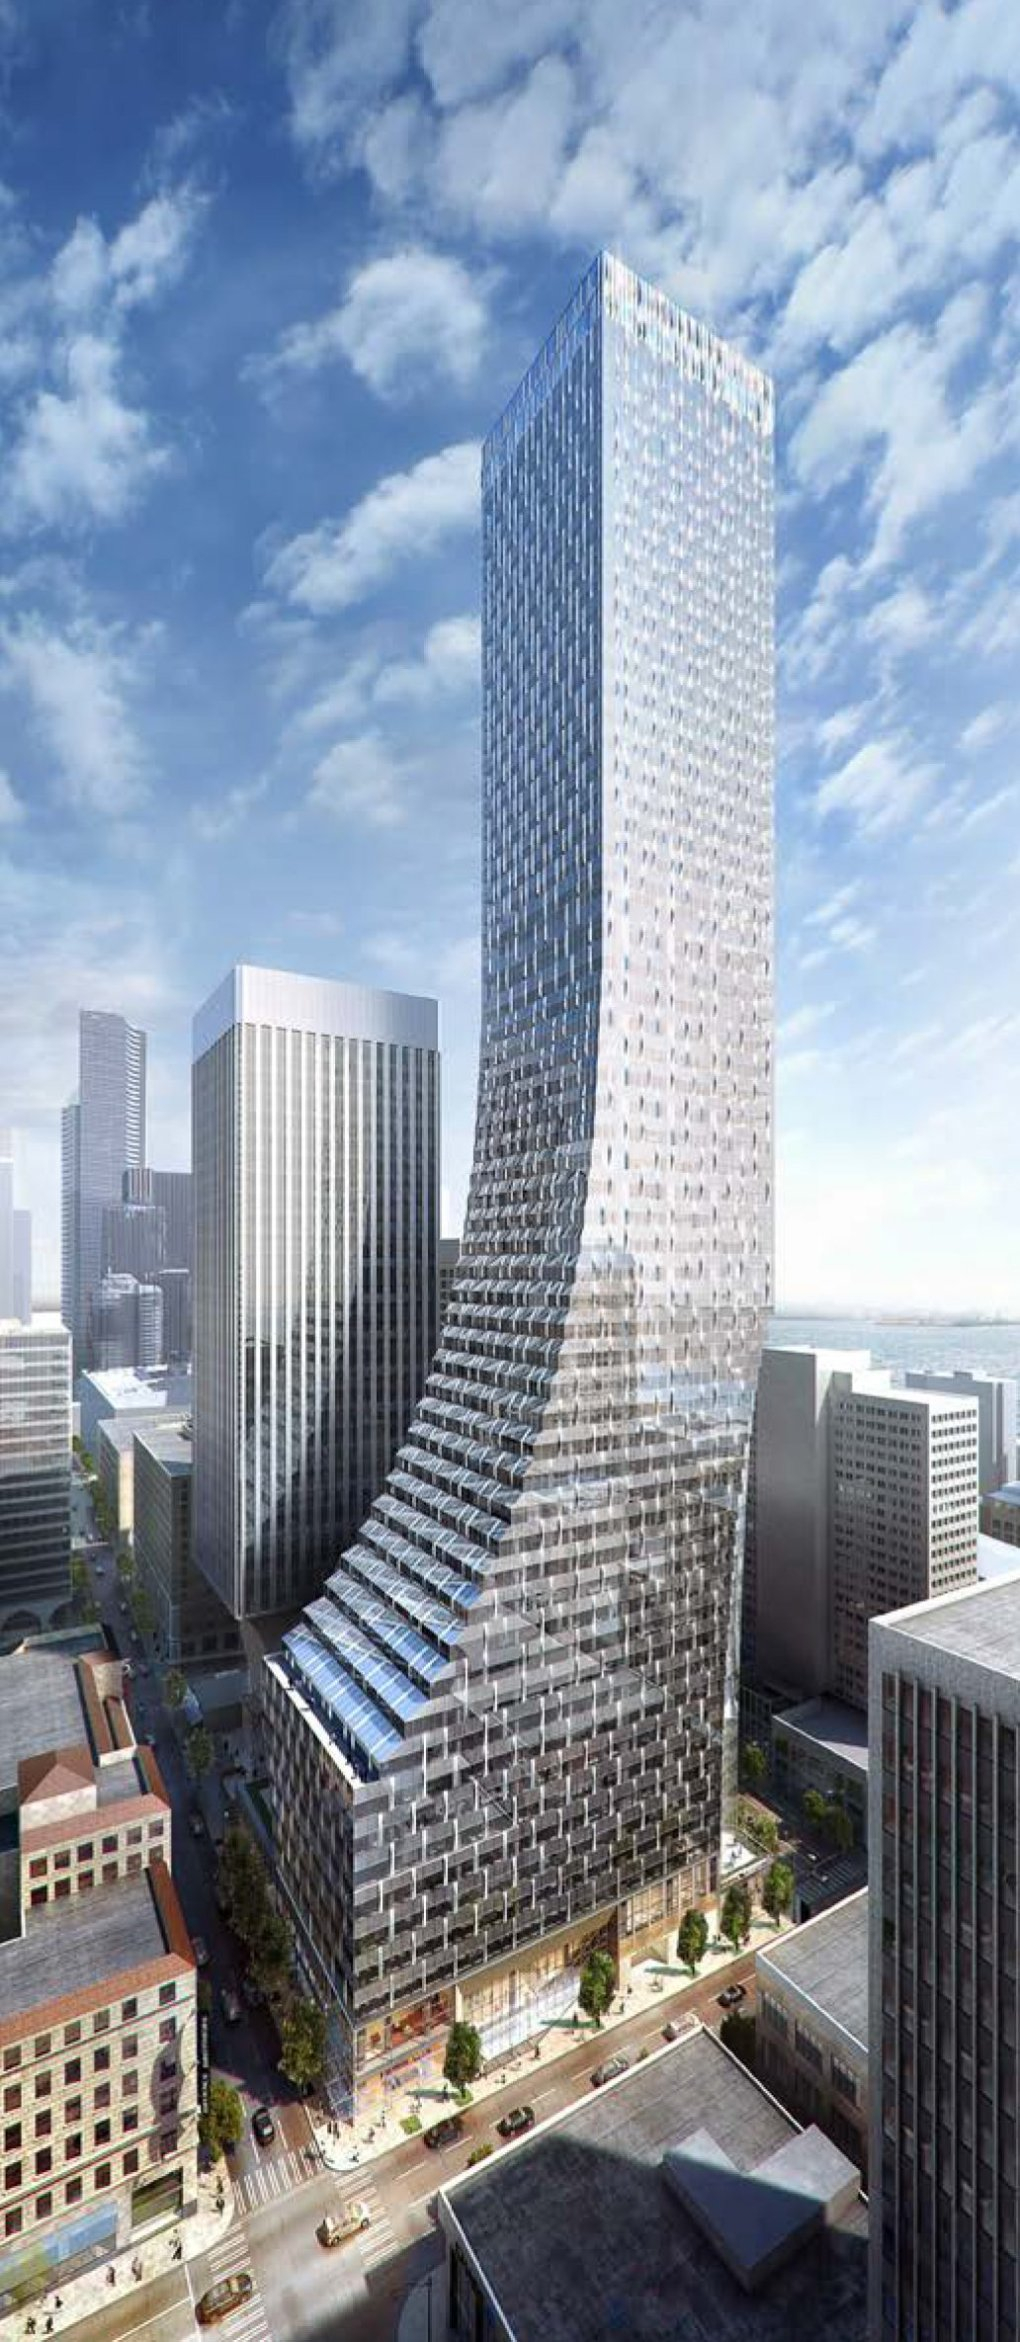 Design Board OKs 58 story Downtown Tower With Changes 